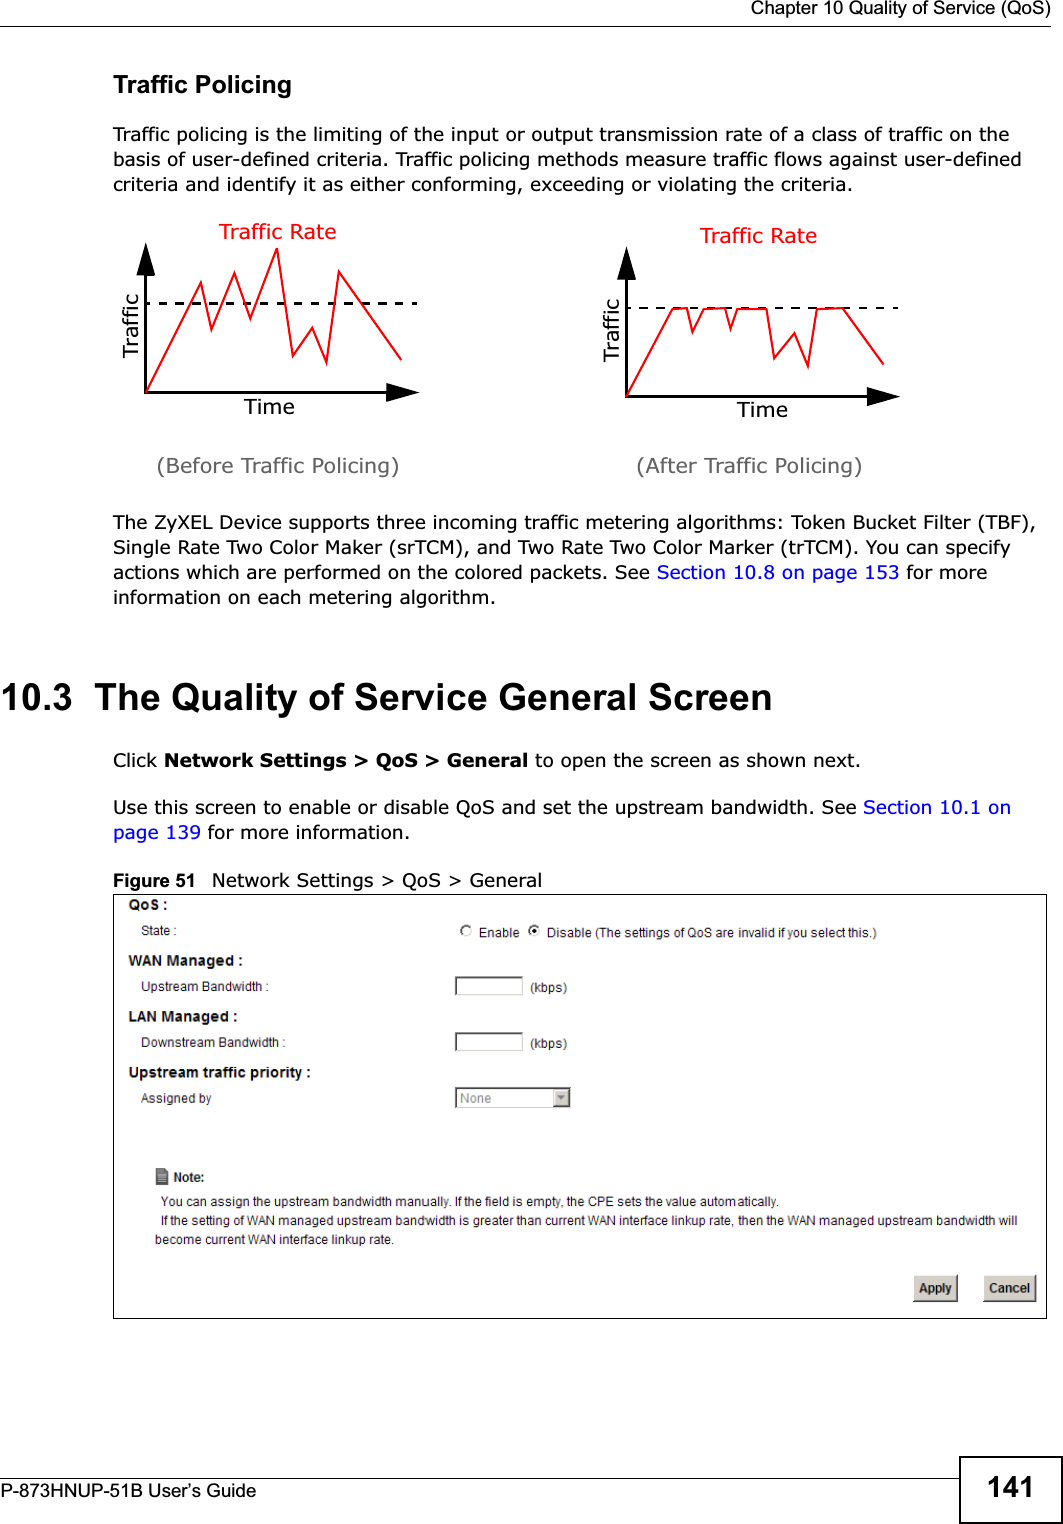  Chapter 10 Quality of Service (QoS)P-873HNUP-51B User’s Guide 141Traffic PolicingTraffic policing is the limiting of the input or output transmission rate of a class of traffic on the basis of user-defined criteria. Traffic policing methods measure traffic flows against user-defined criteria and identify it as either conforming, exceeding or violating the criteria.The ZyXEL Device supports three incoming traffic metering algorithms: Token Bucket Filter (TBF), Single Rate Two Color Maker (srTCM), and Two Rate Two Color Marker (trTCM). You can specify actions which are performed on the colored packets. See Section 10.8 on page 153 for more information on each metering algorithm.10.3  The Quality of Service General Screen Click Network Settings &gt; QoS &gt; General to open the screen as shown next. Use this screen to enable or disable QoS and set the upstream bandwidth. See Section 10.1 on page 139 for more information.Figure 51   Network Settings &gt; QoS &gt; General TrafficTimeTraffic RateTrafficTimeTraffic Rate(Before Traffic Policing) (After Traffic Policing)